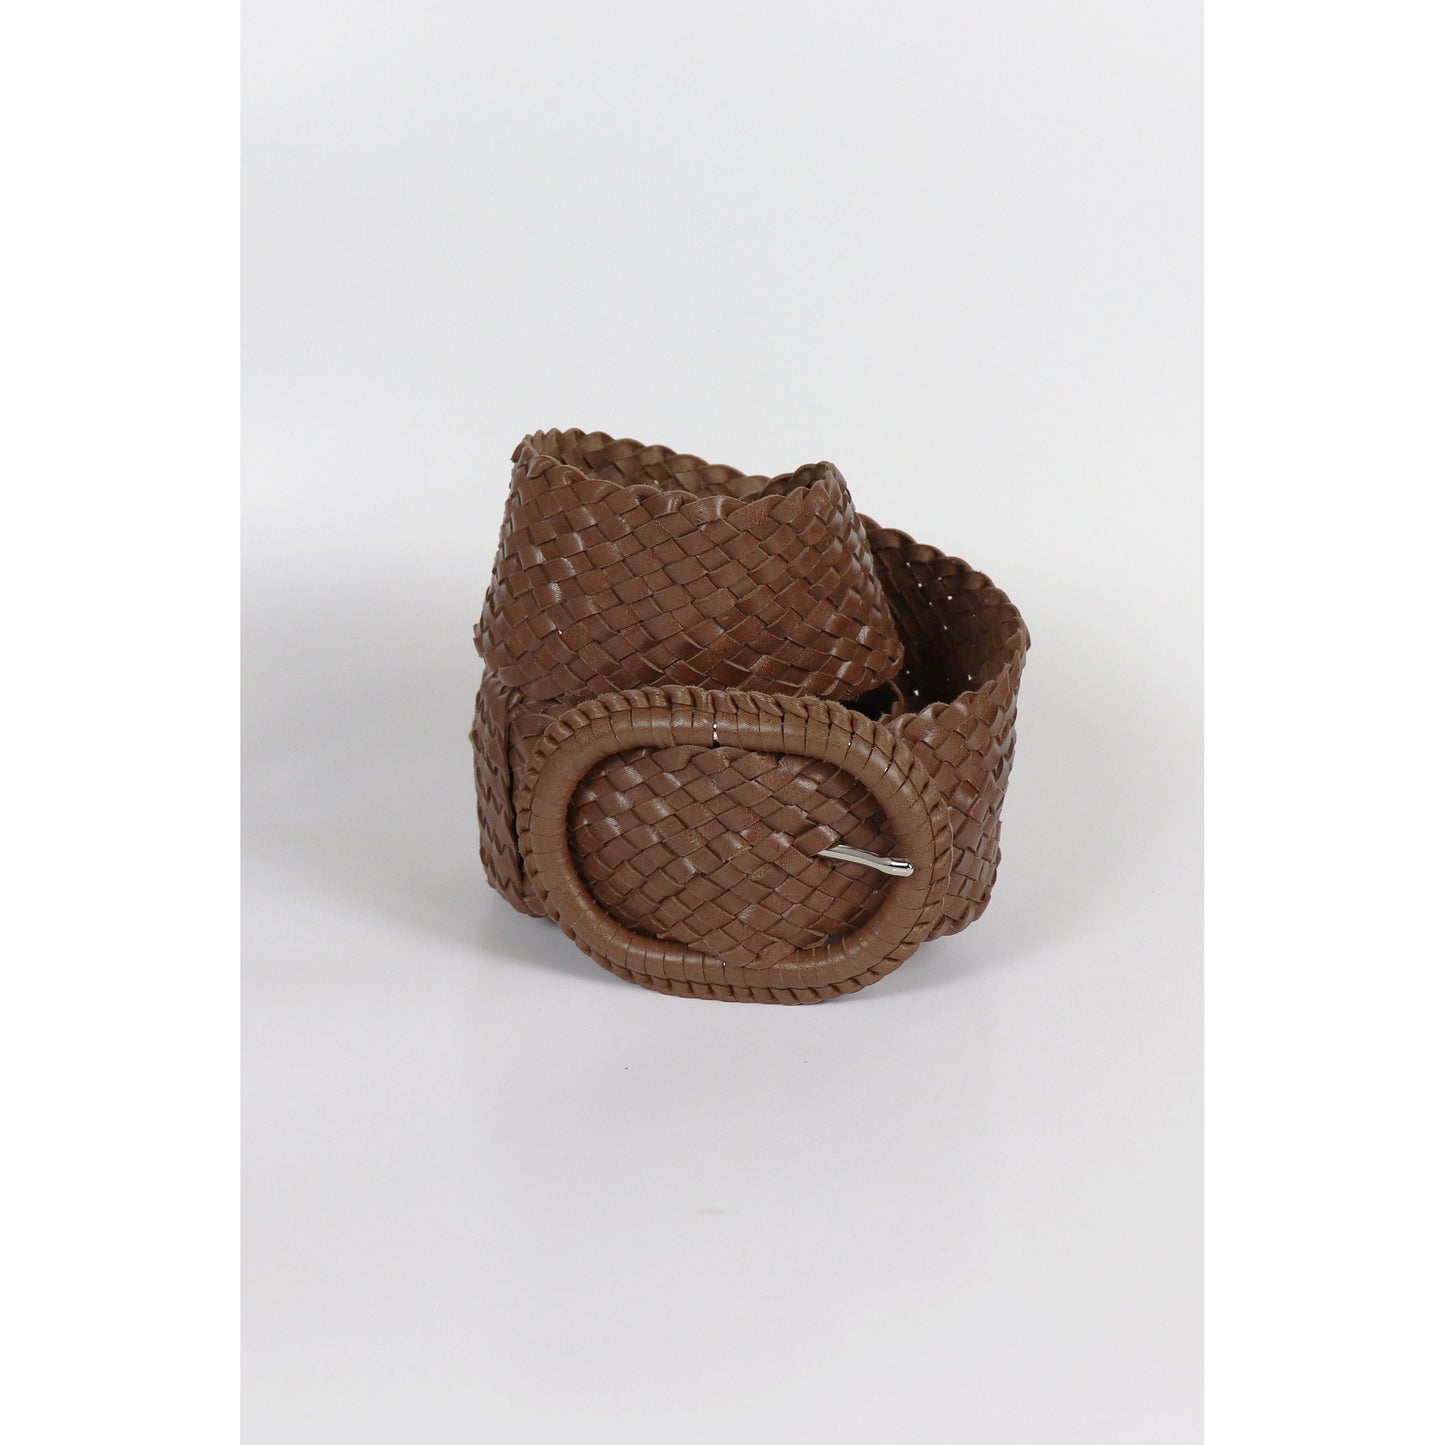 Woven brown leather belt coiled.